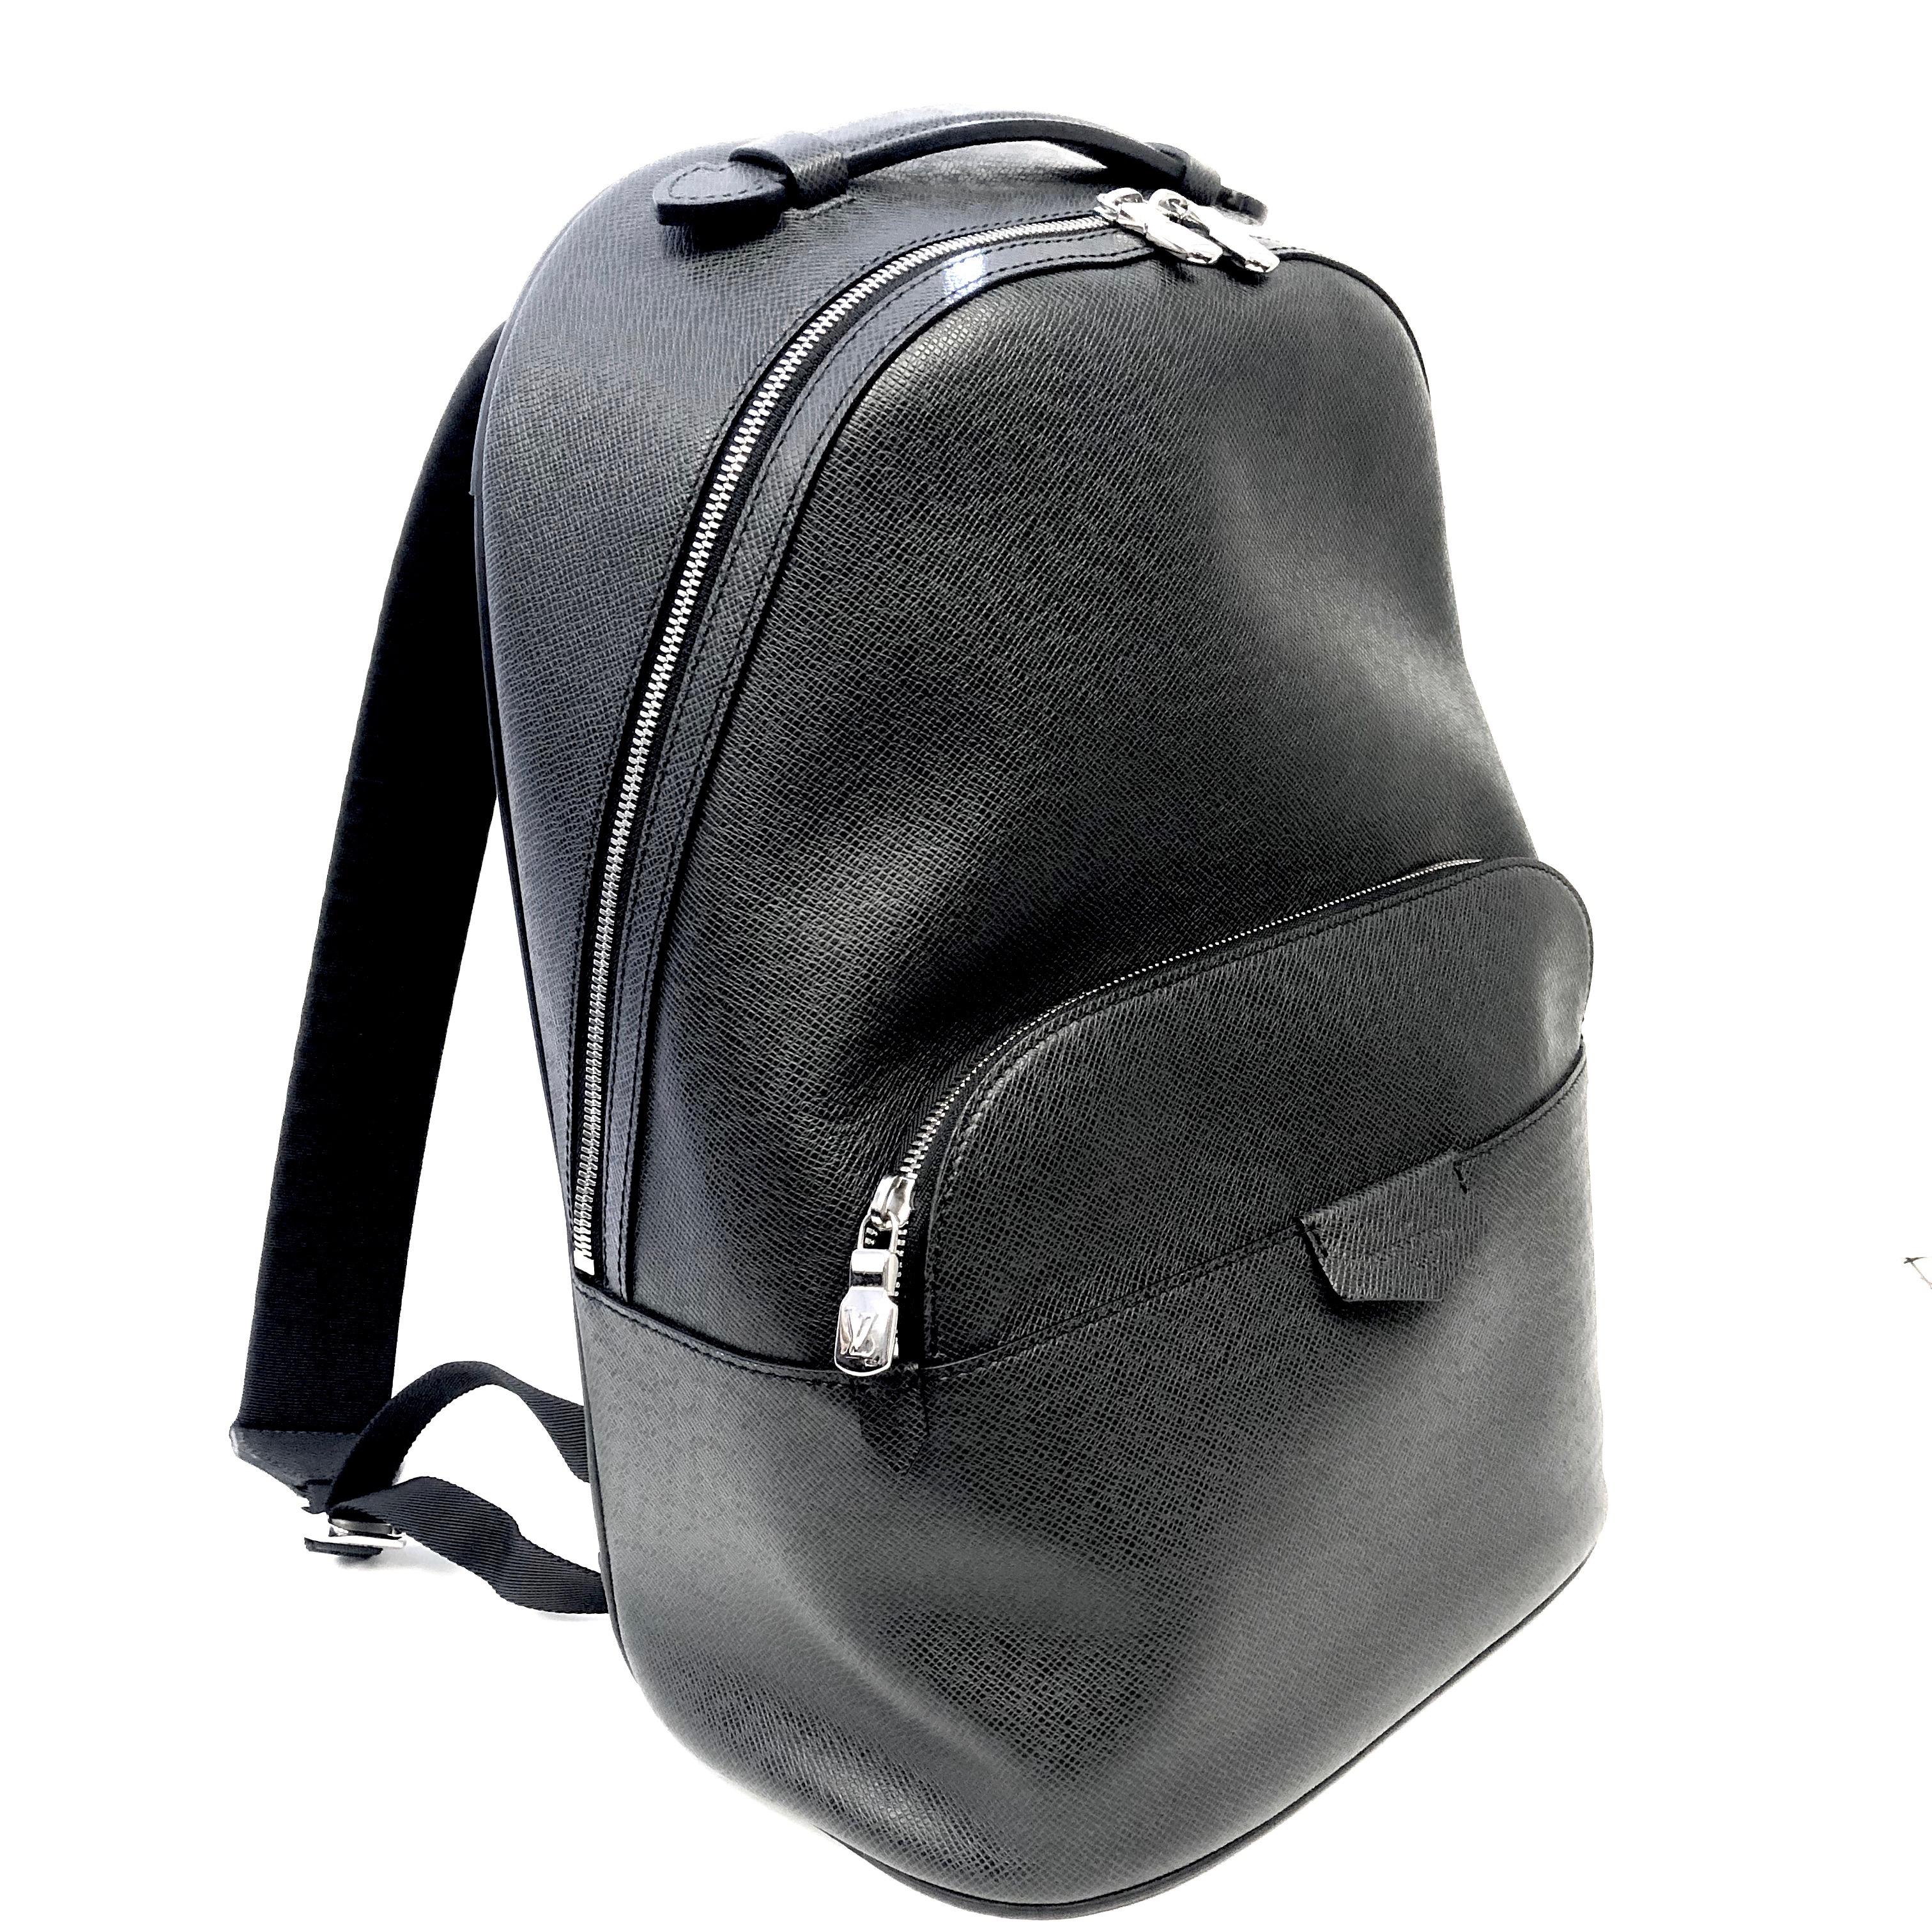 Louis Vuitton dark gray Anton backpack in excellent, like new condition.
Featuring:
-Taiga cowhide leather
-Cowhide leather trim
-Textile lining
-Silver-color metal hardware
-Top handle
-Zip closure
-Adjustable and non removable textile shoulder